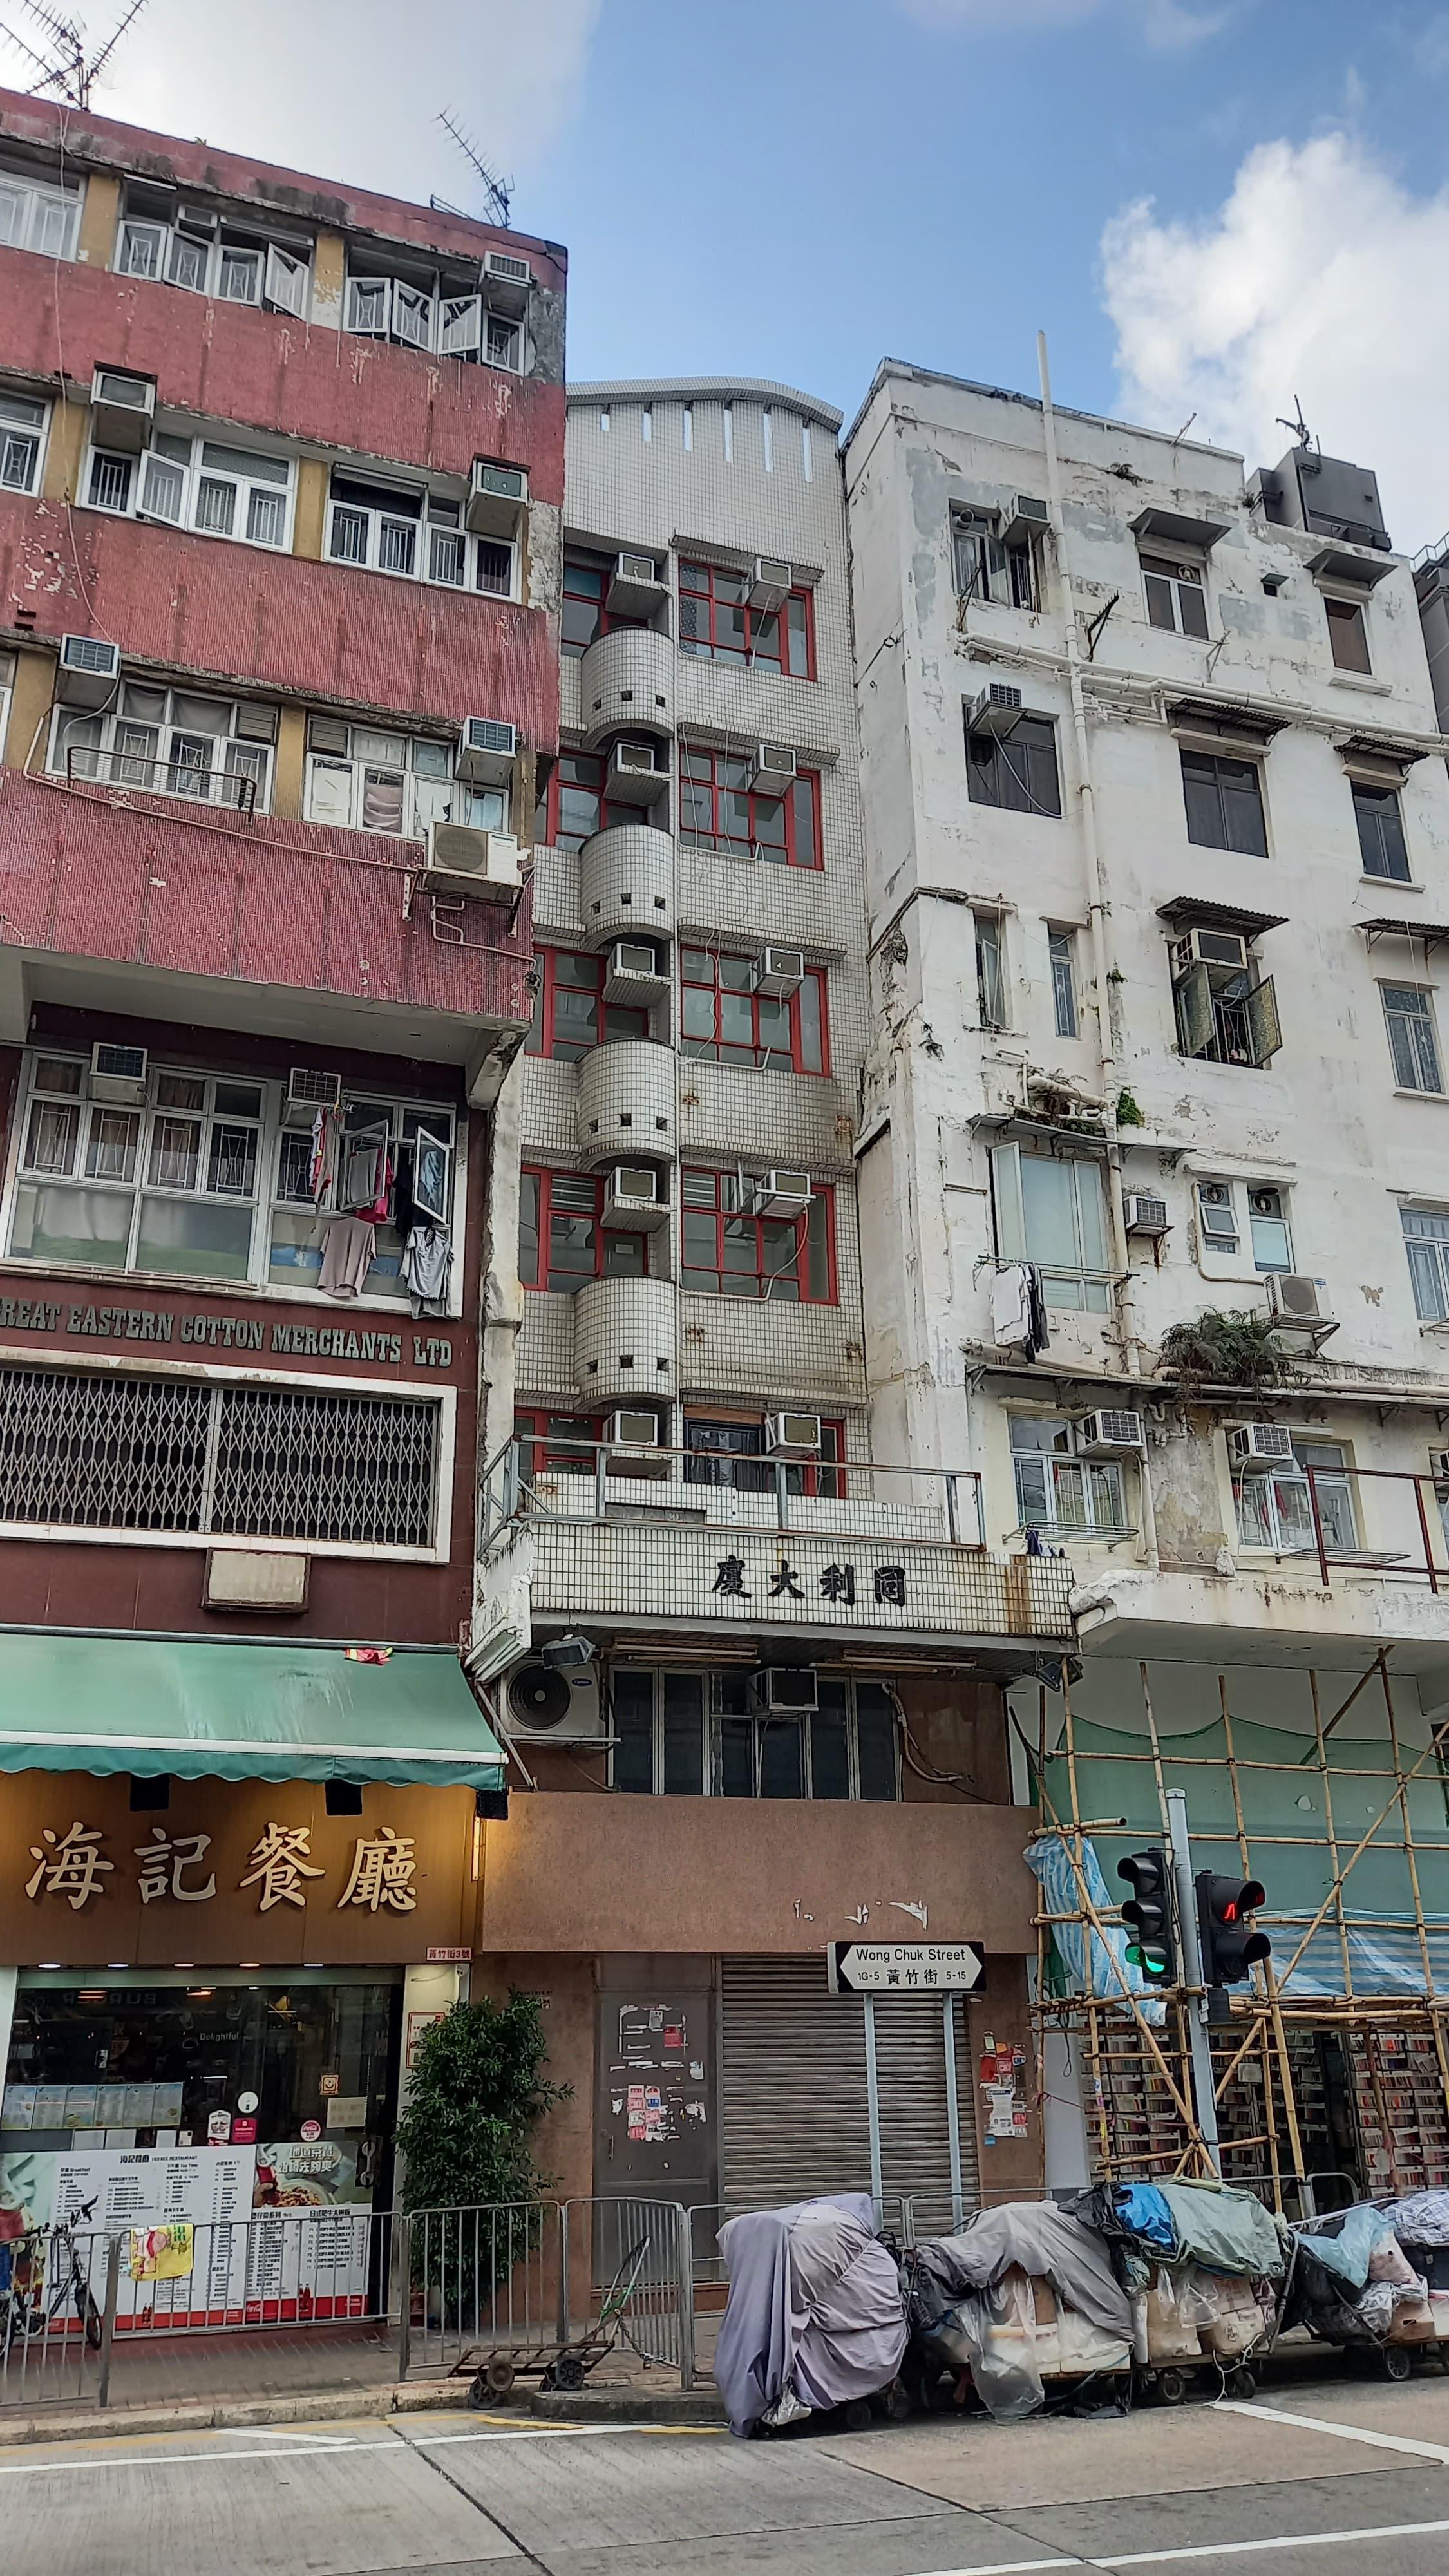 The Assessment Committee for the Funding Scheme to Support Transitional Housing Projects by Non-government Organisations agreed today (September 28) to subsidise a transitional housing development through conversion of vacant residential flats in a tenement building at 5 Wong Chuk Street, Sham Shui Po, Kowloon.